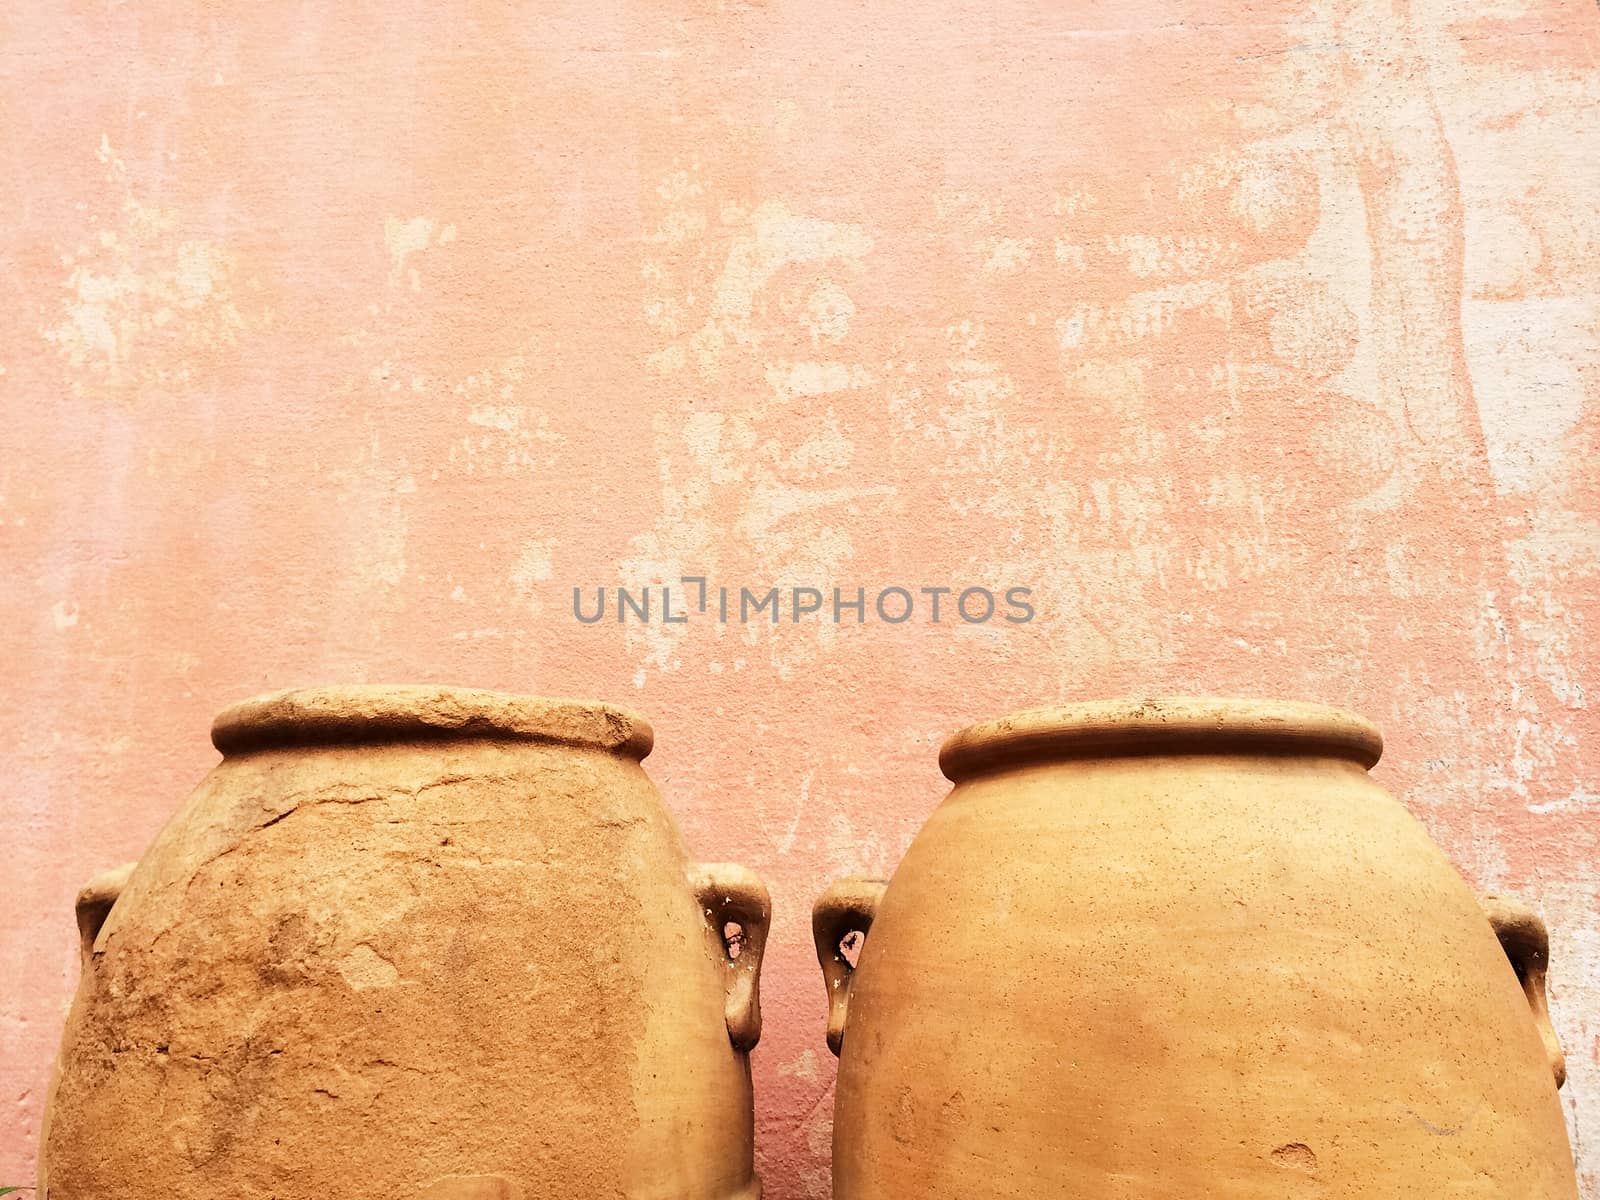 Clay amphoras near an old wall, traditional craft.